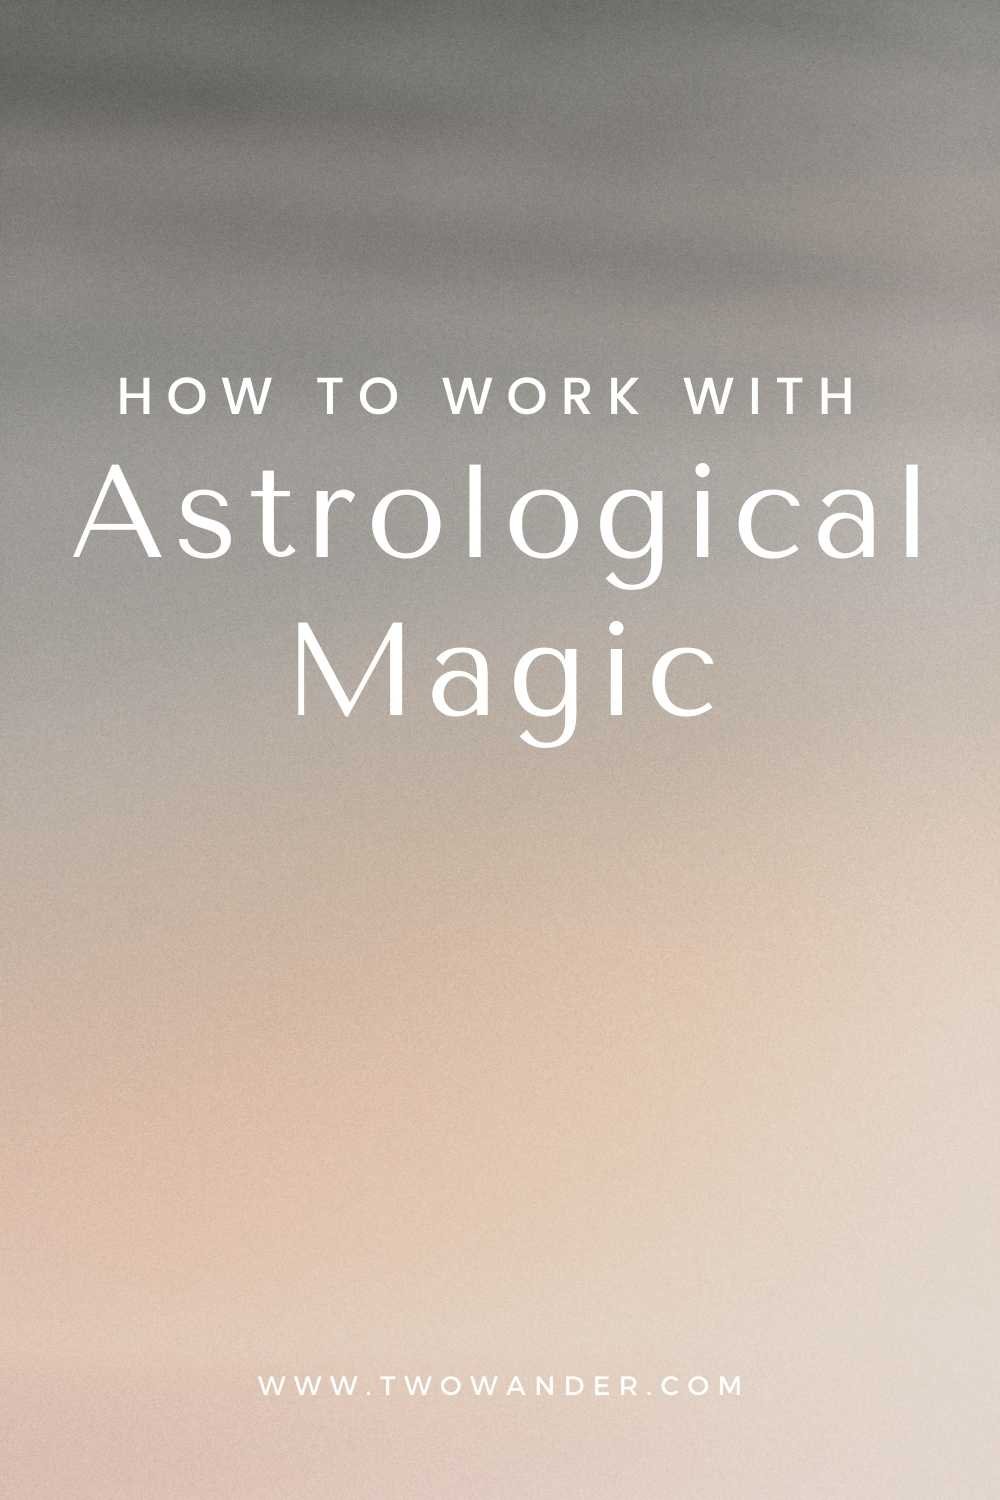 two-wander-how-to-work-with-astrological-magic